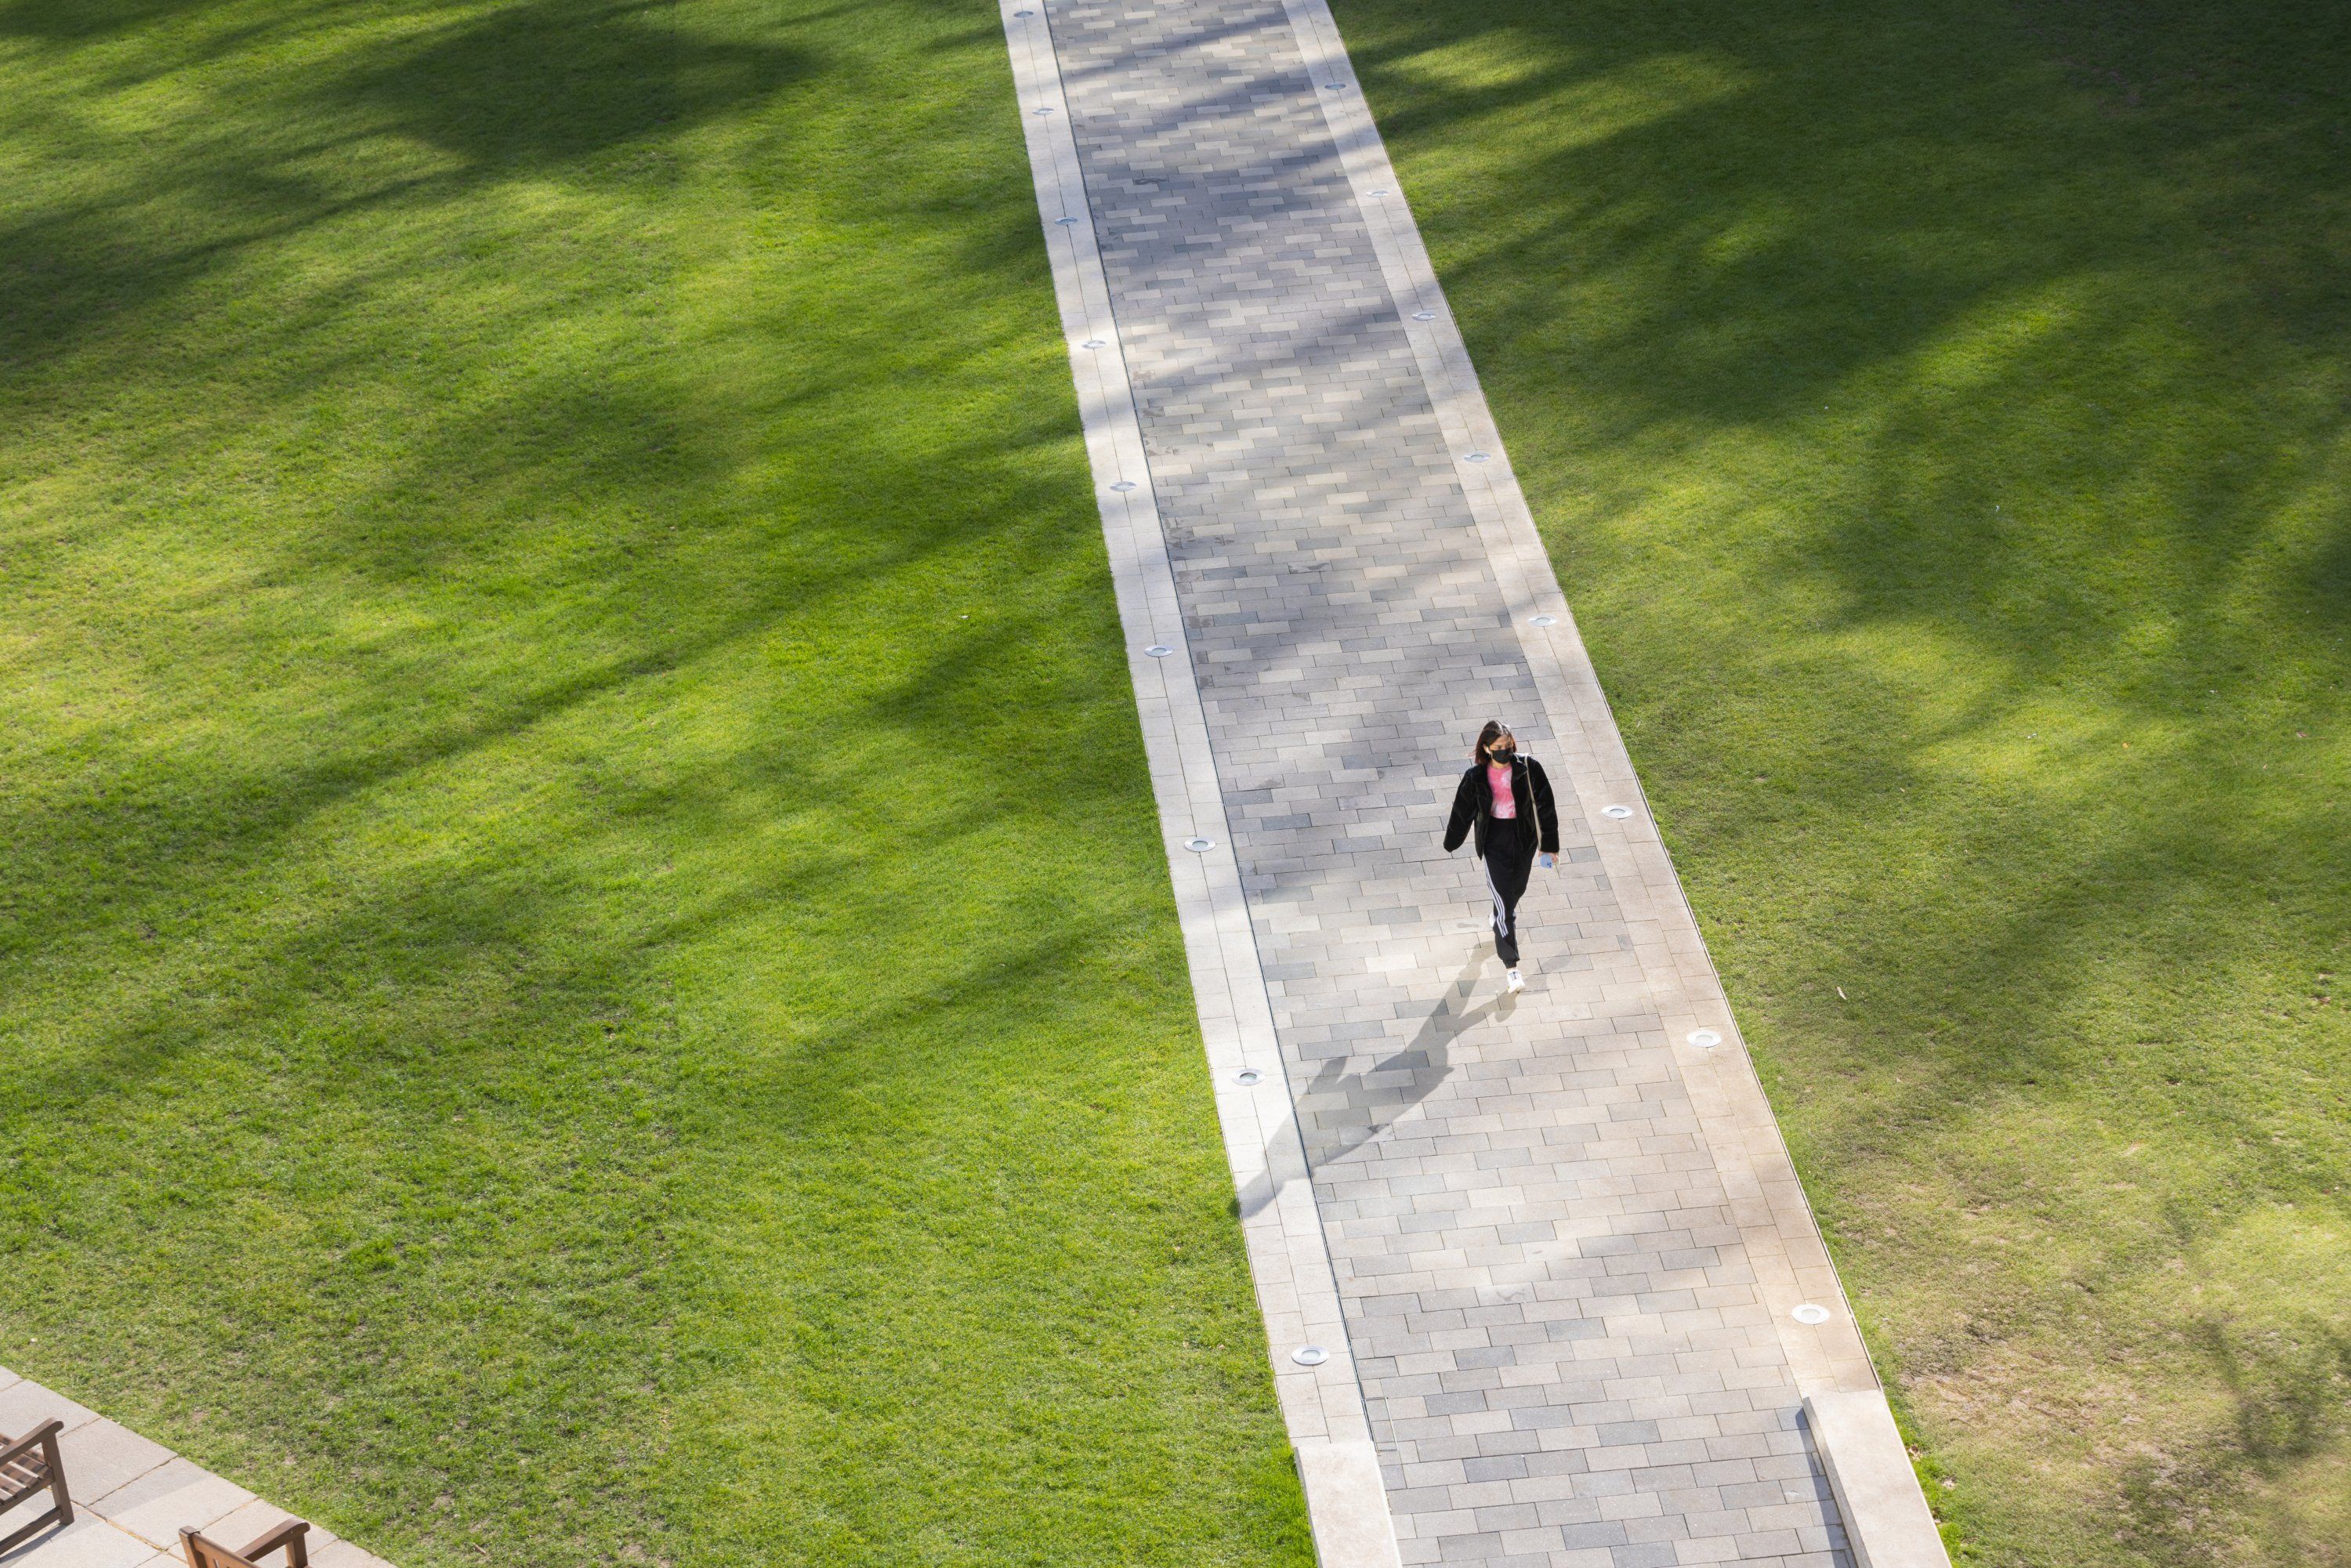 Student walking through campus at Imperial College London